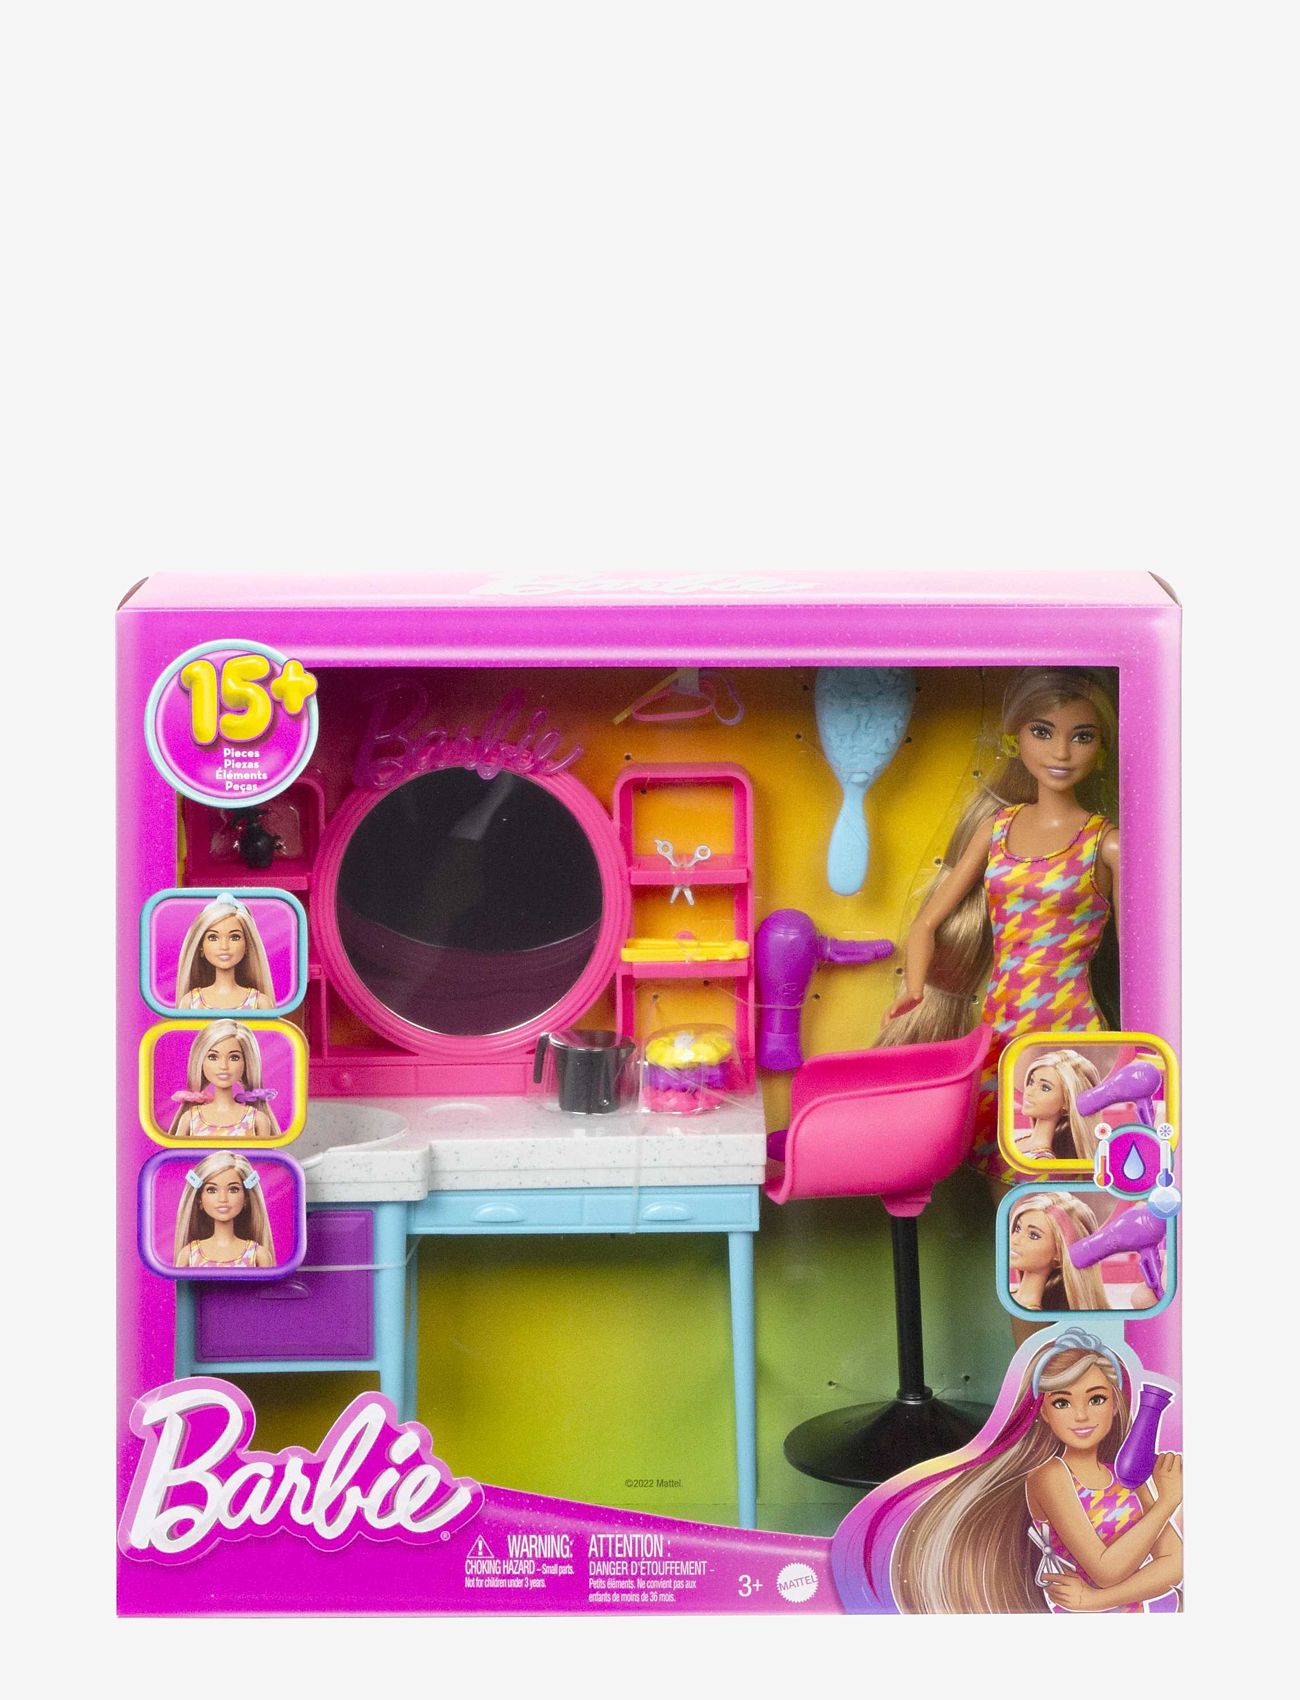 Barbie - Totally Hair Doll and Playset - nuket - multi color - 1